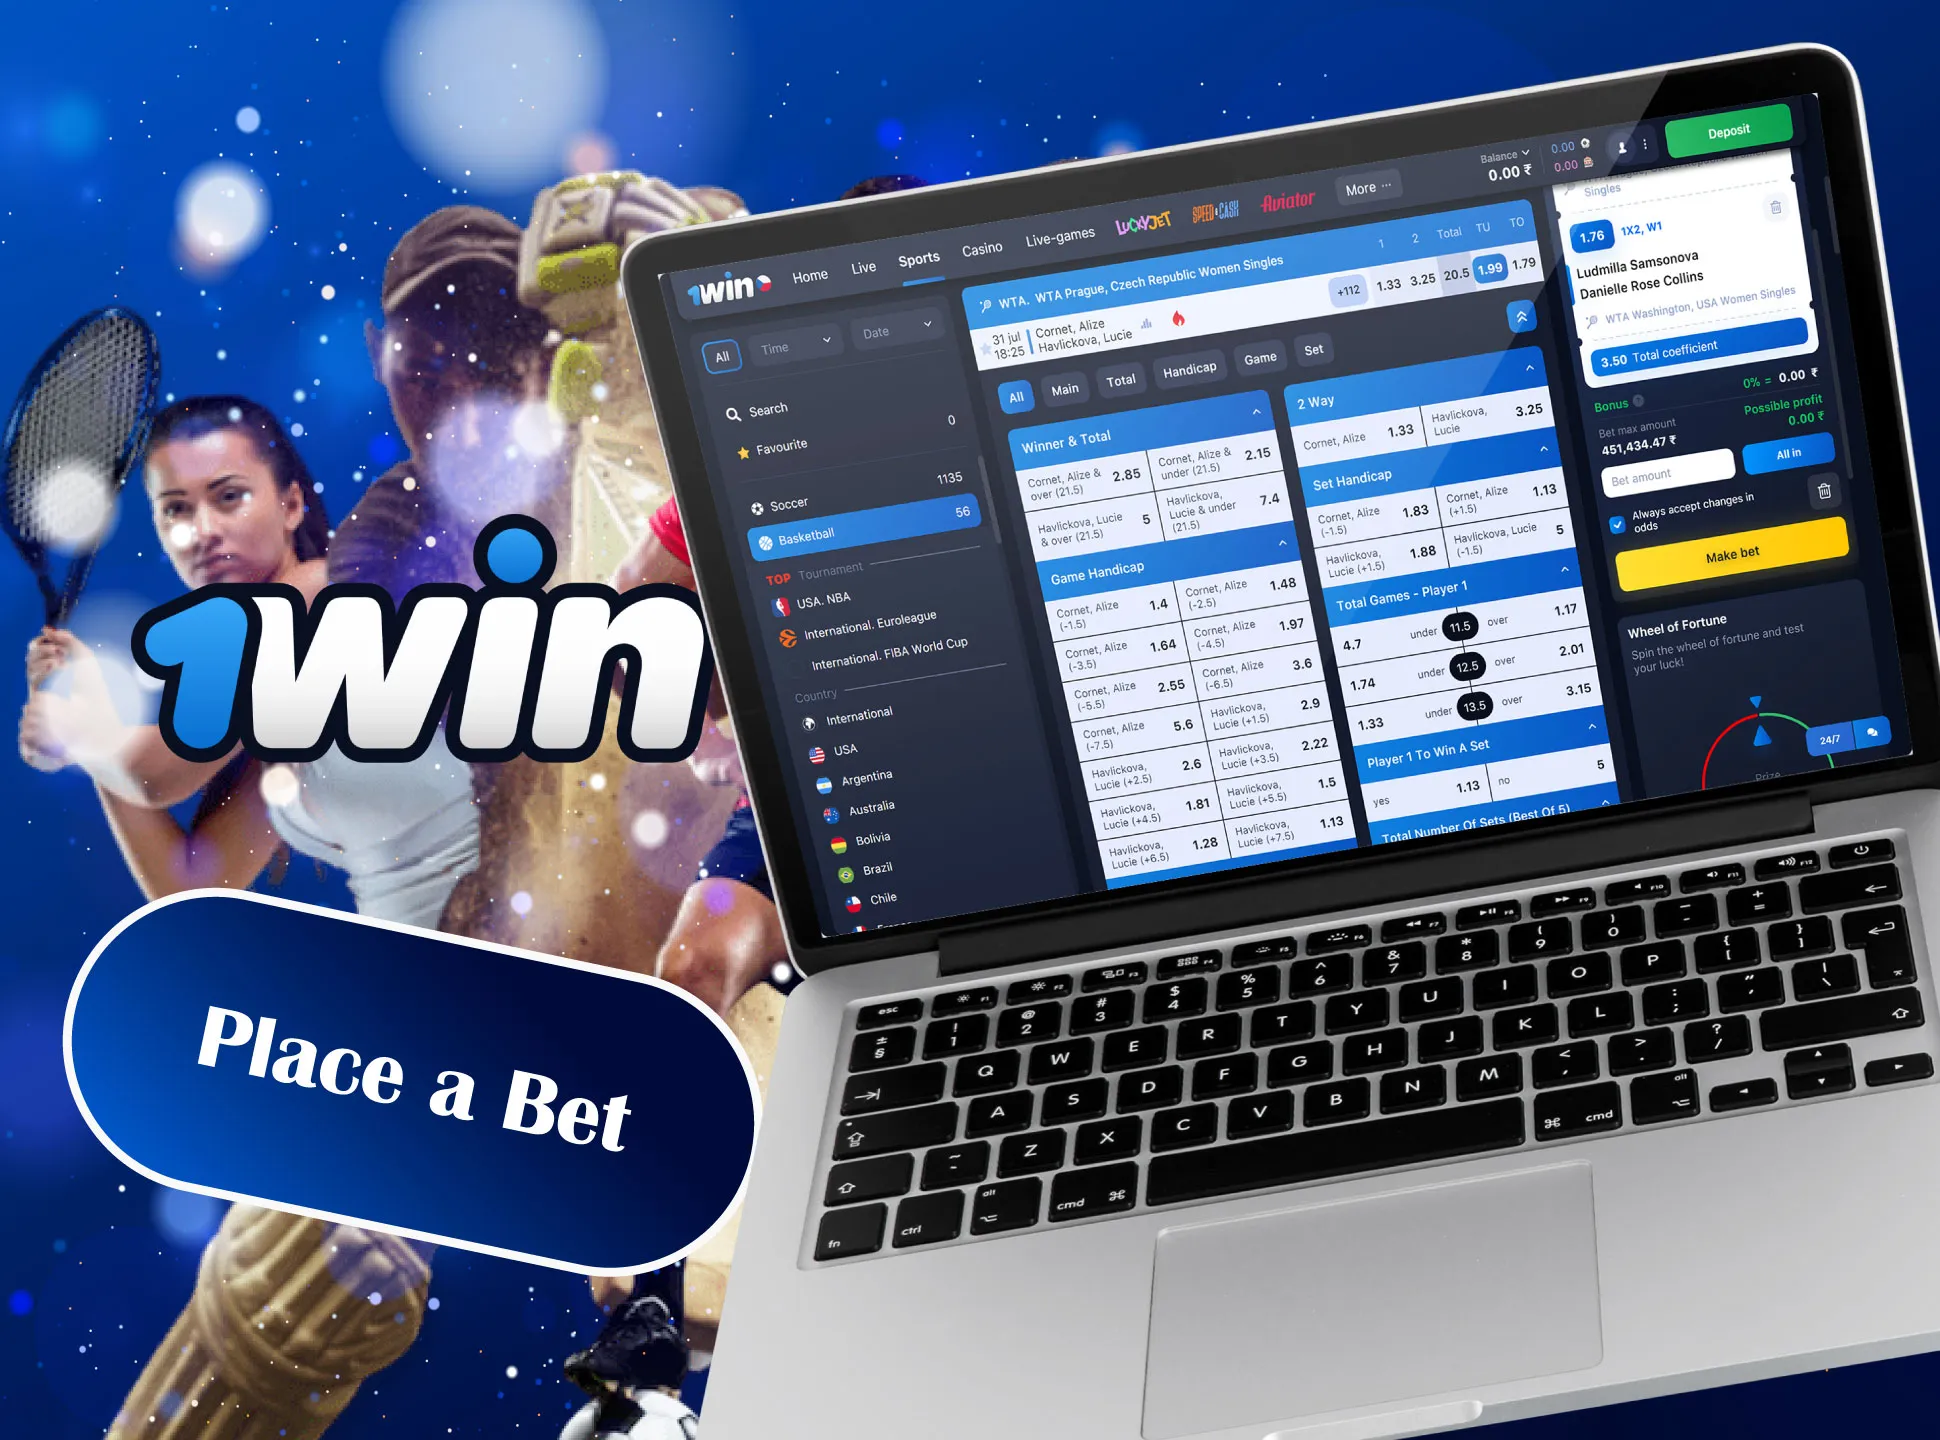 Sign up for 1win? top up the account, choose an event and place a bet.